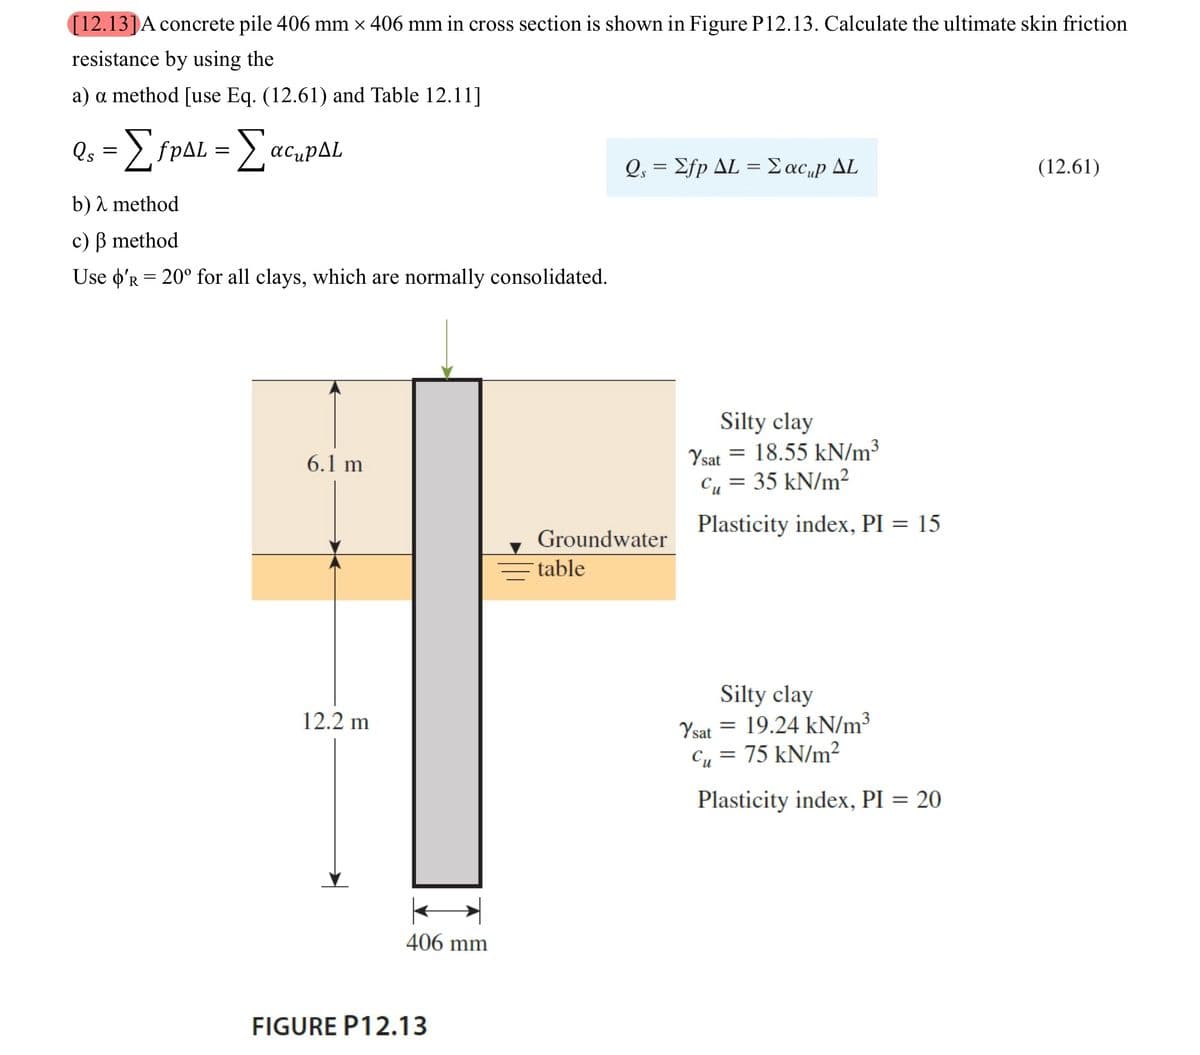 [12.13] A concrete pile 406 mm × 406 mm in cross section is shown in Figure P12.13. Calculate the ultimate skin friction
resistance by using the
a) a method [use Eq. (12.61) and Table 12.11]
Qs = [fpAL = Σ acupAL
b) λ method
c) ẞ method
Use O'R = 20° for all clays, which are normally consolidated.
6.1 m
12.2 m
406 mm
FIGURE P12.13
Qs Efp AL = Σacup AL
table
=
Groundwater
Silty clay
=
Ysat
Cu = 35 kN/m²
Plasticity index, PI = 15
18.55 kN/m³
Silty clay
=
Ysat
Cu = 75 kN/m²
Plasticity index, PI = 20
19.24 kN/m³
(12.61)